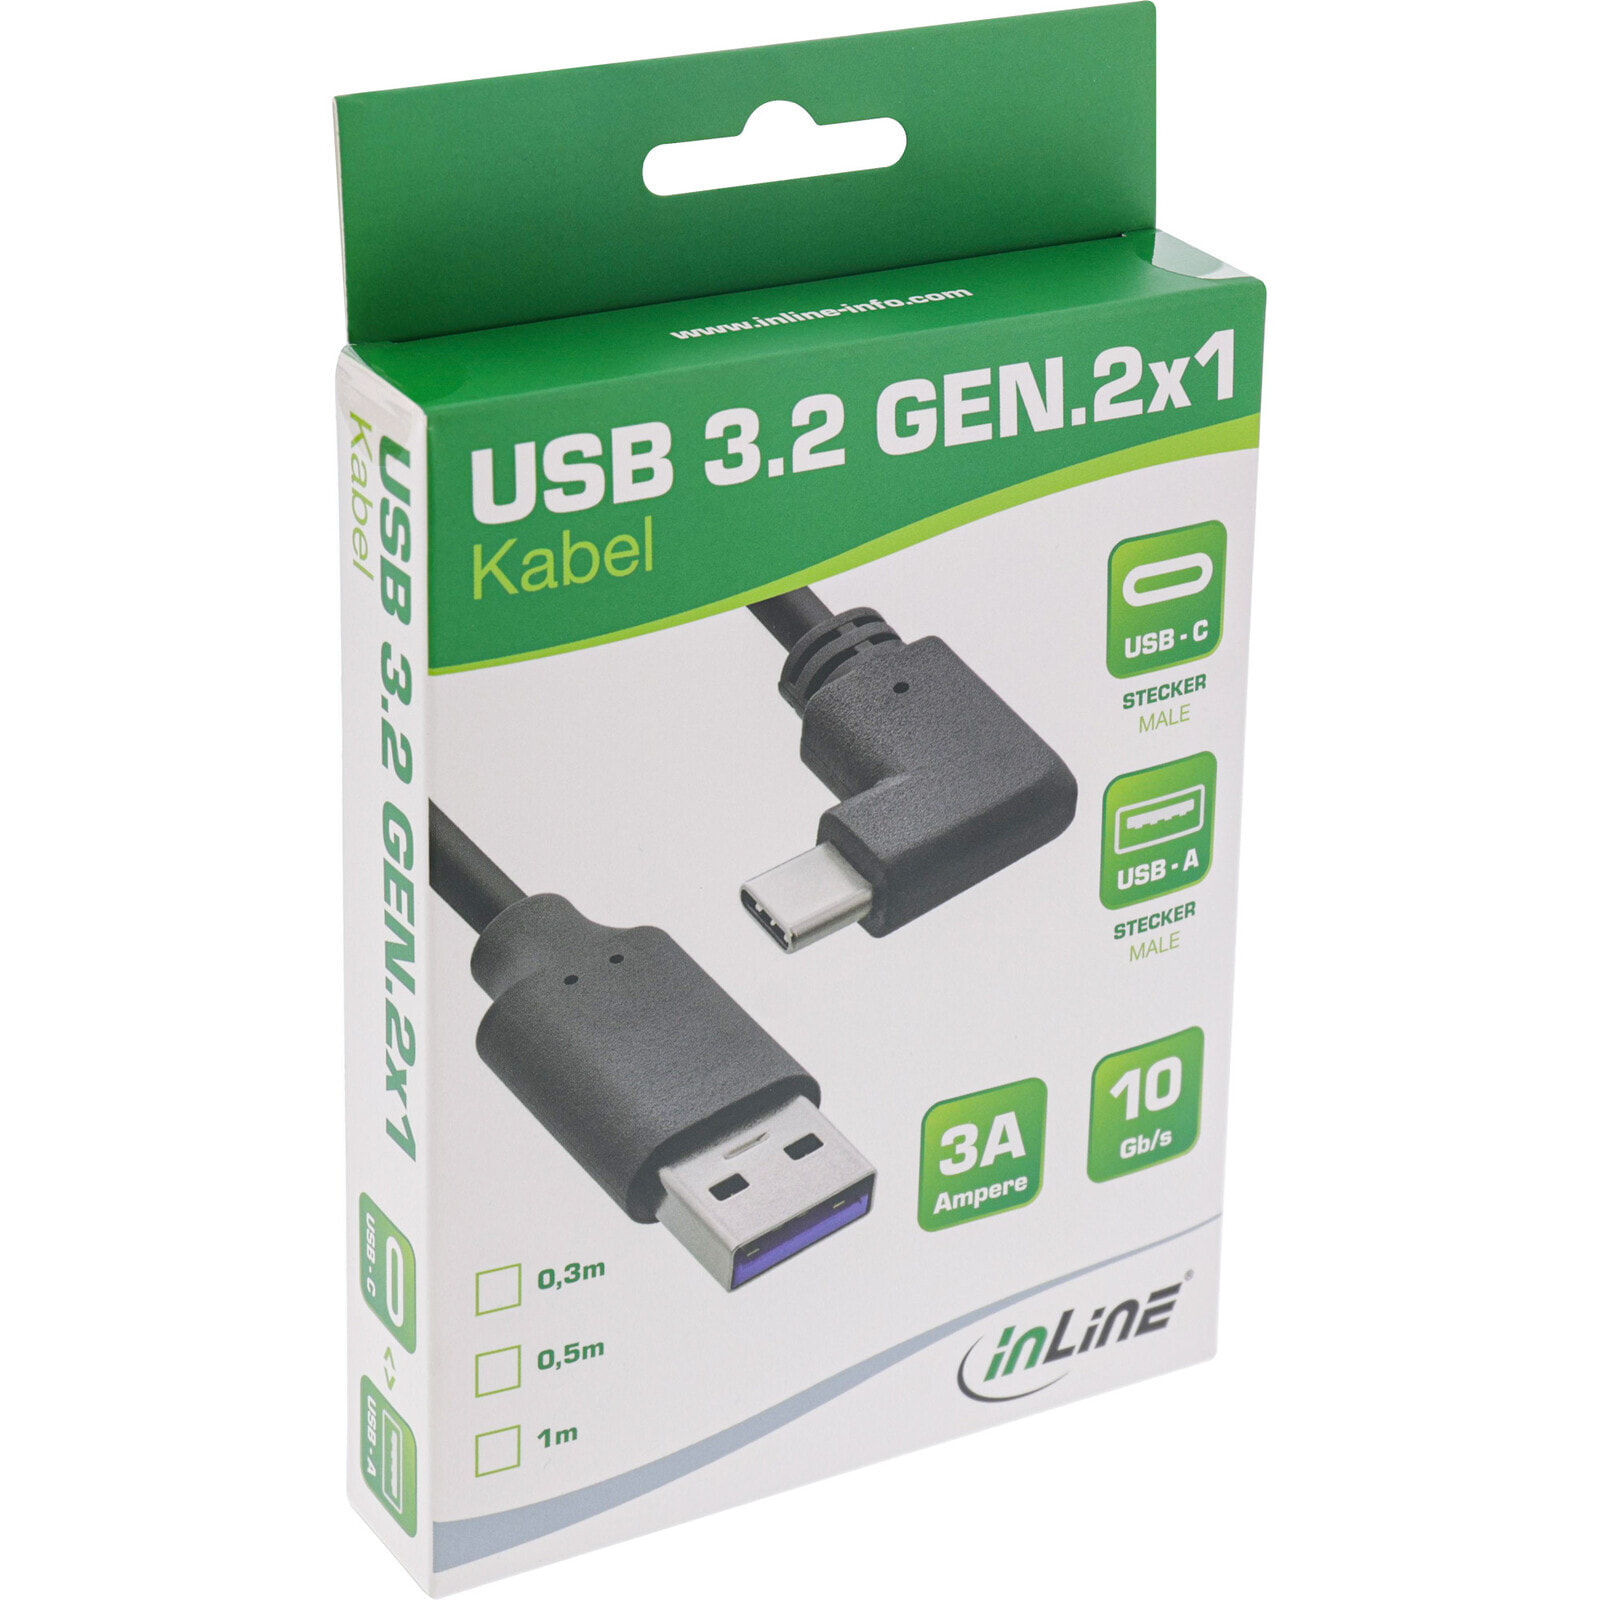 USB 3.2 cable - USB-C male angled to USB-A male - black - 0.3m